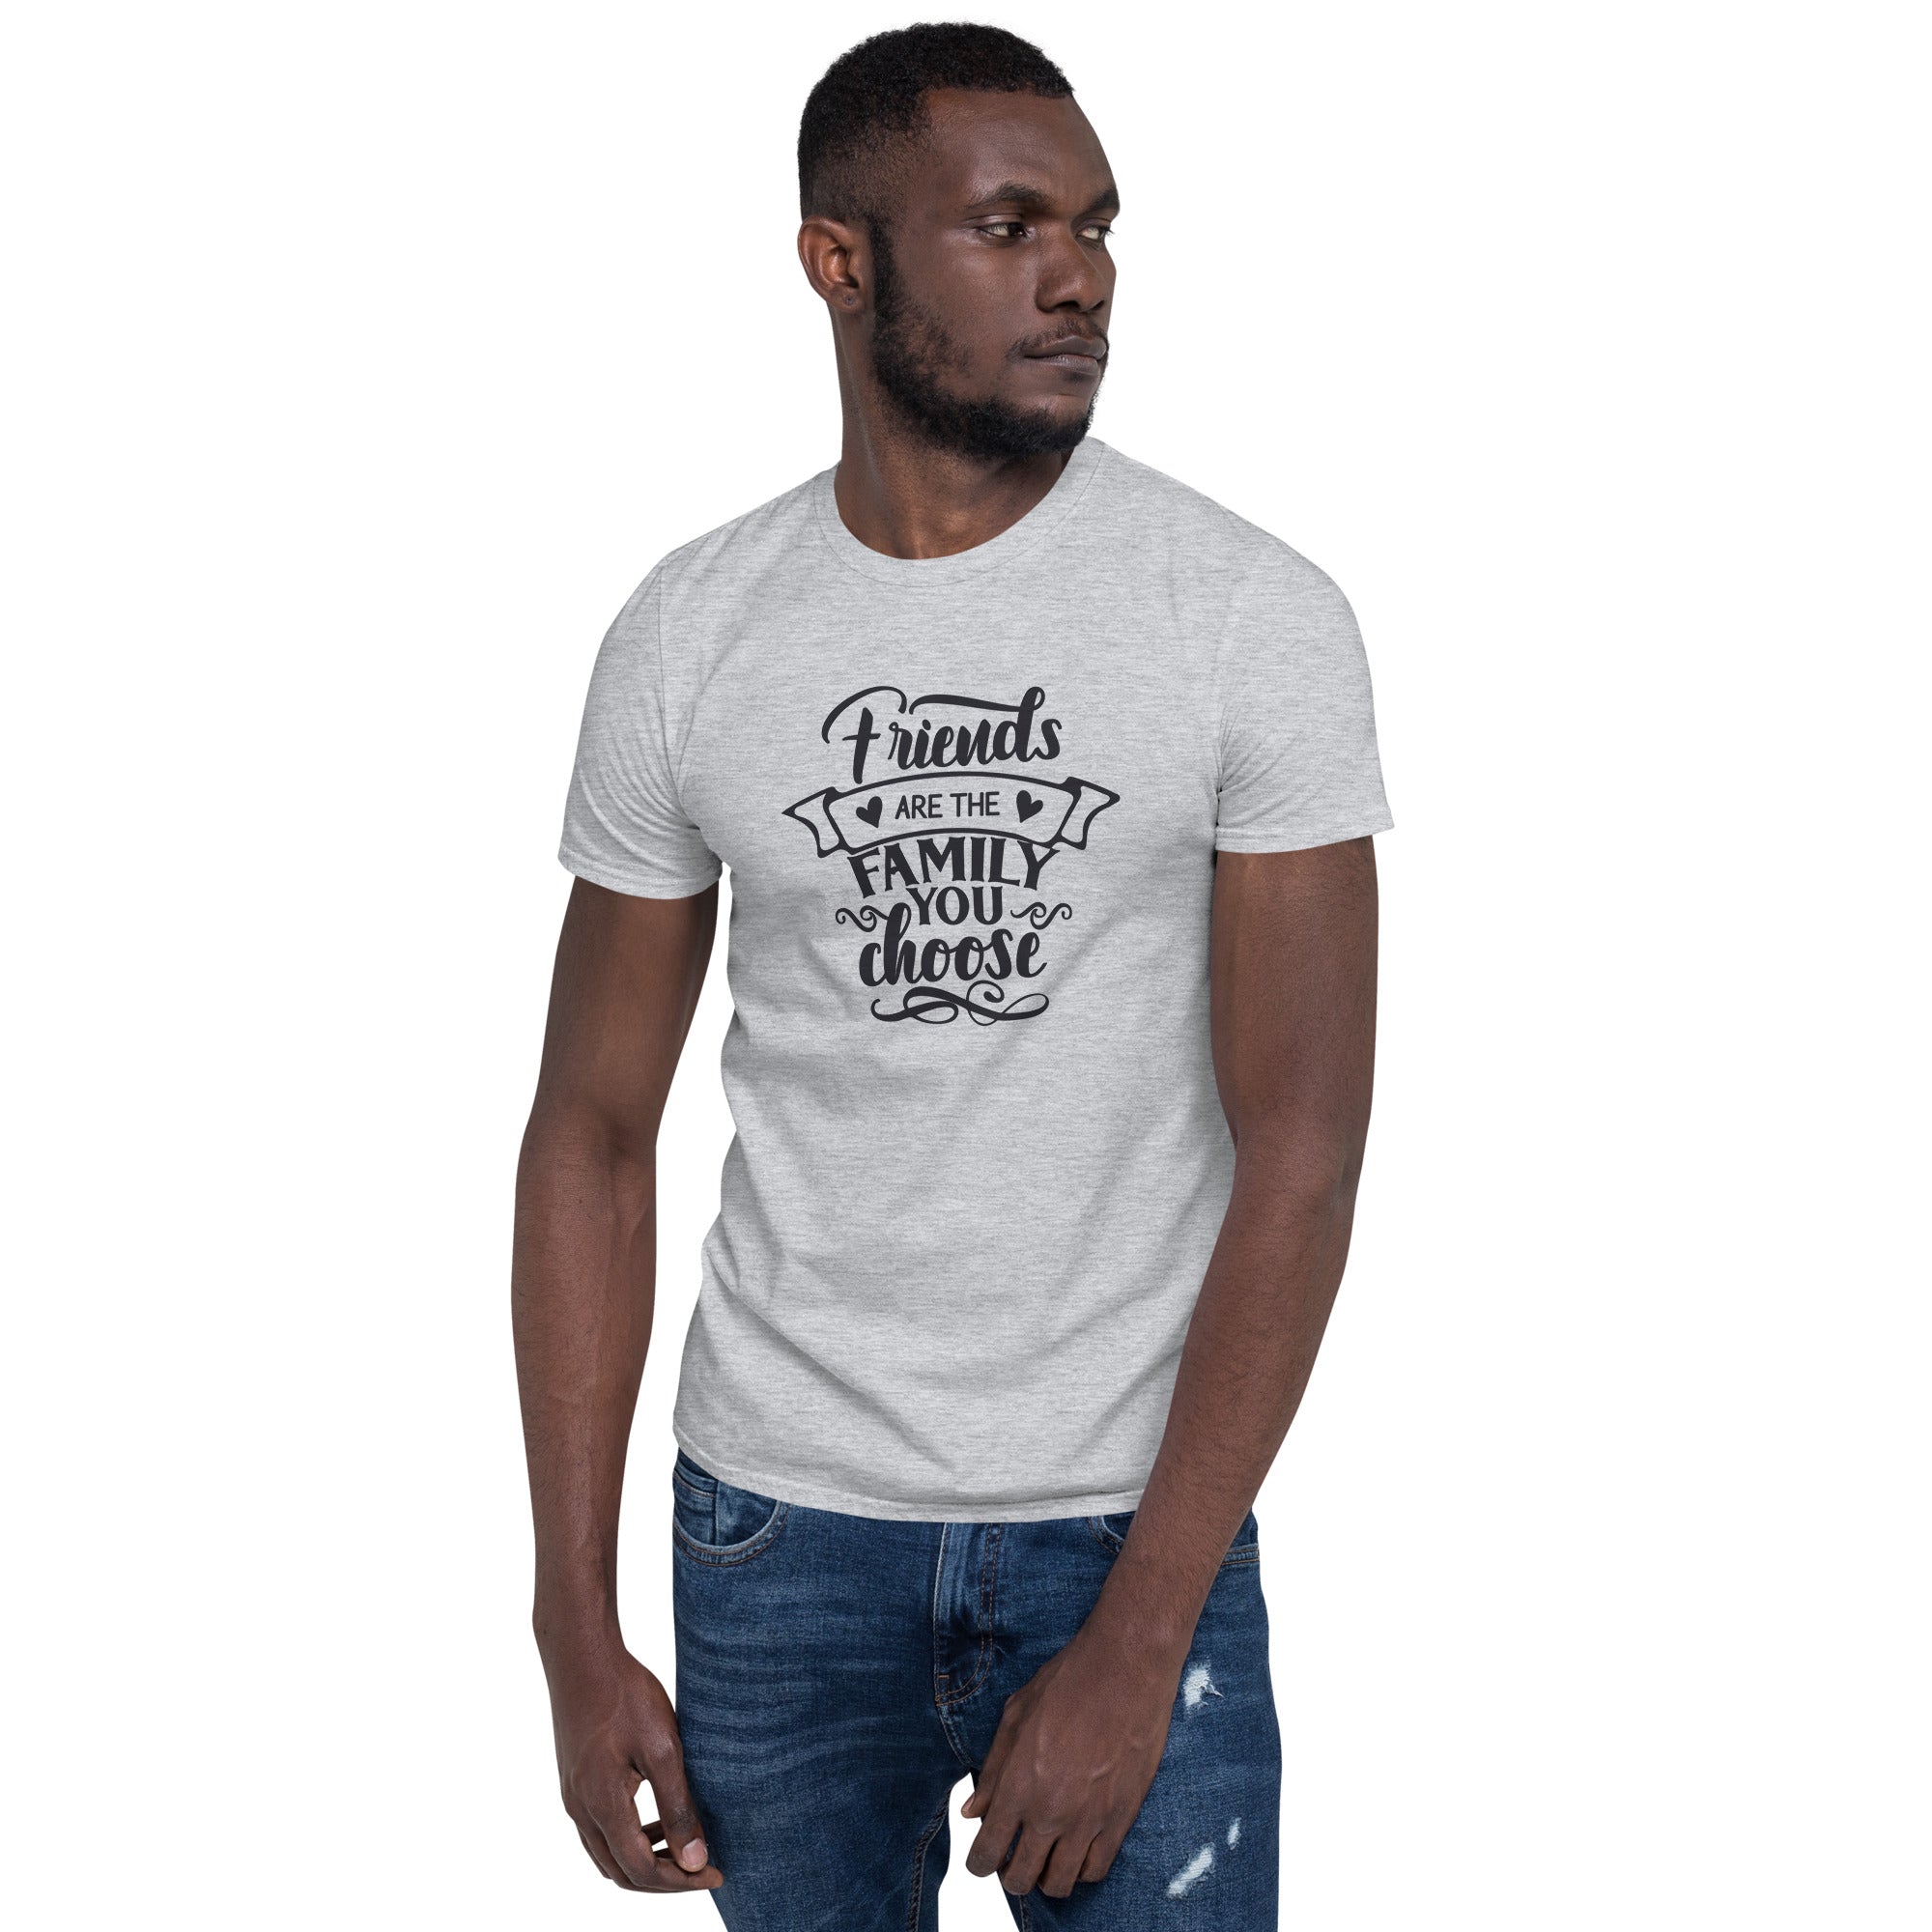 Friends Are The Family You Choose - Short-Sleeve Unisex T-Shirt